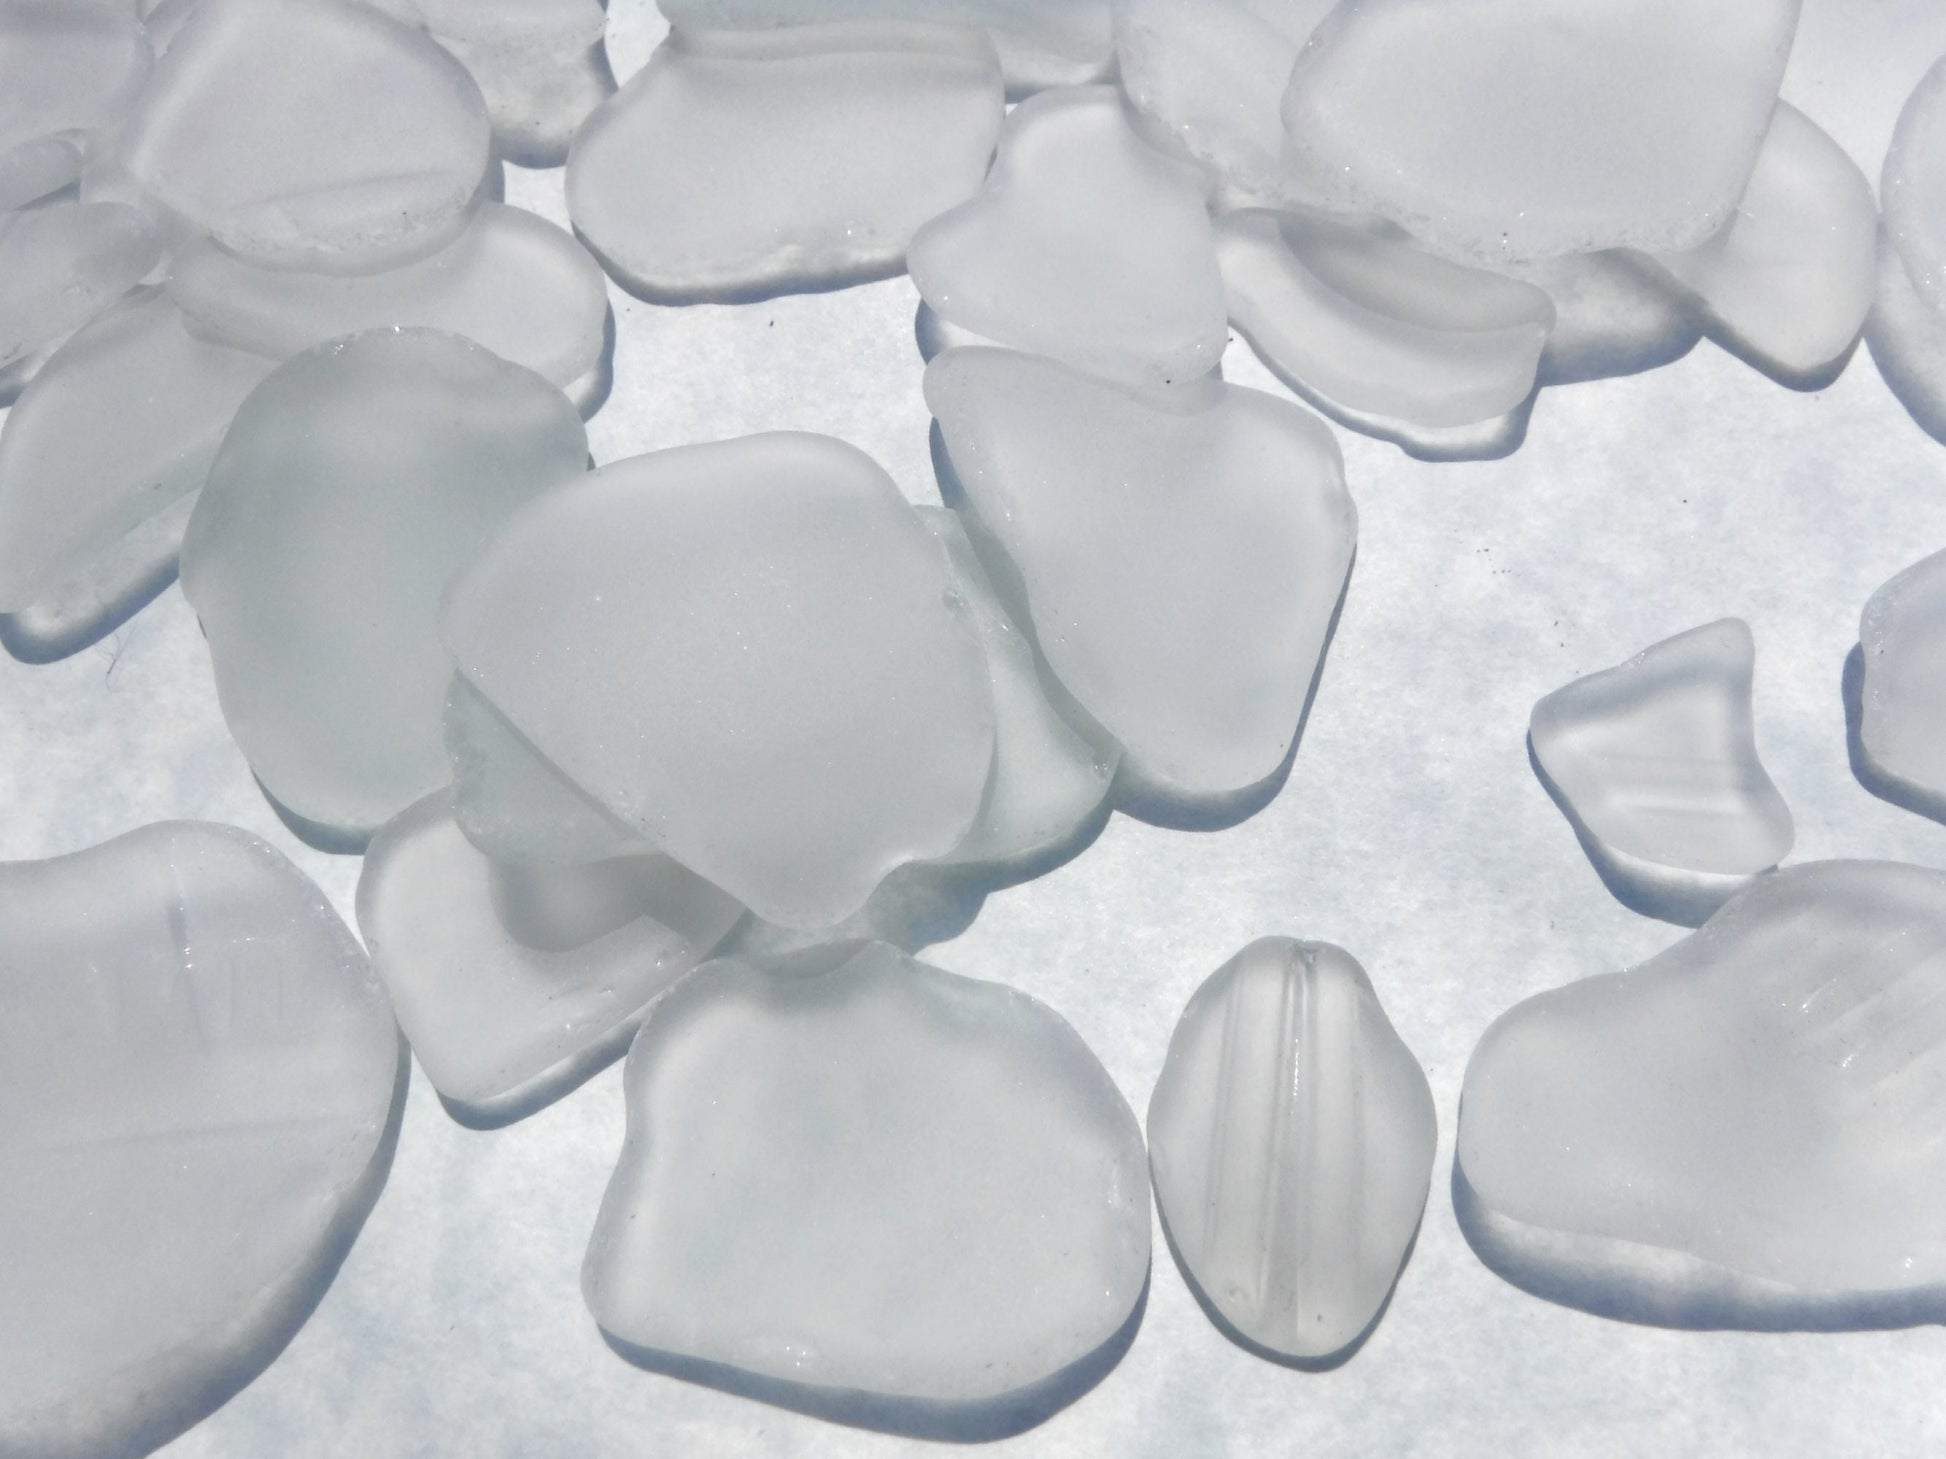 Tumbled Glass Clear Frosted - Half pound - Mosaic Tiles Vase Fillers Craft Supplies Cottage Decor Wedding Favors